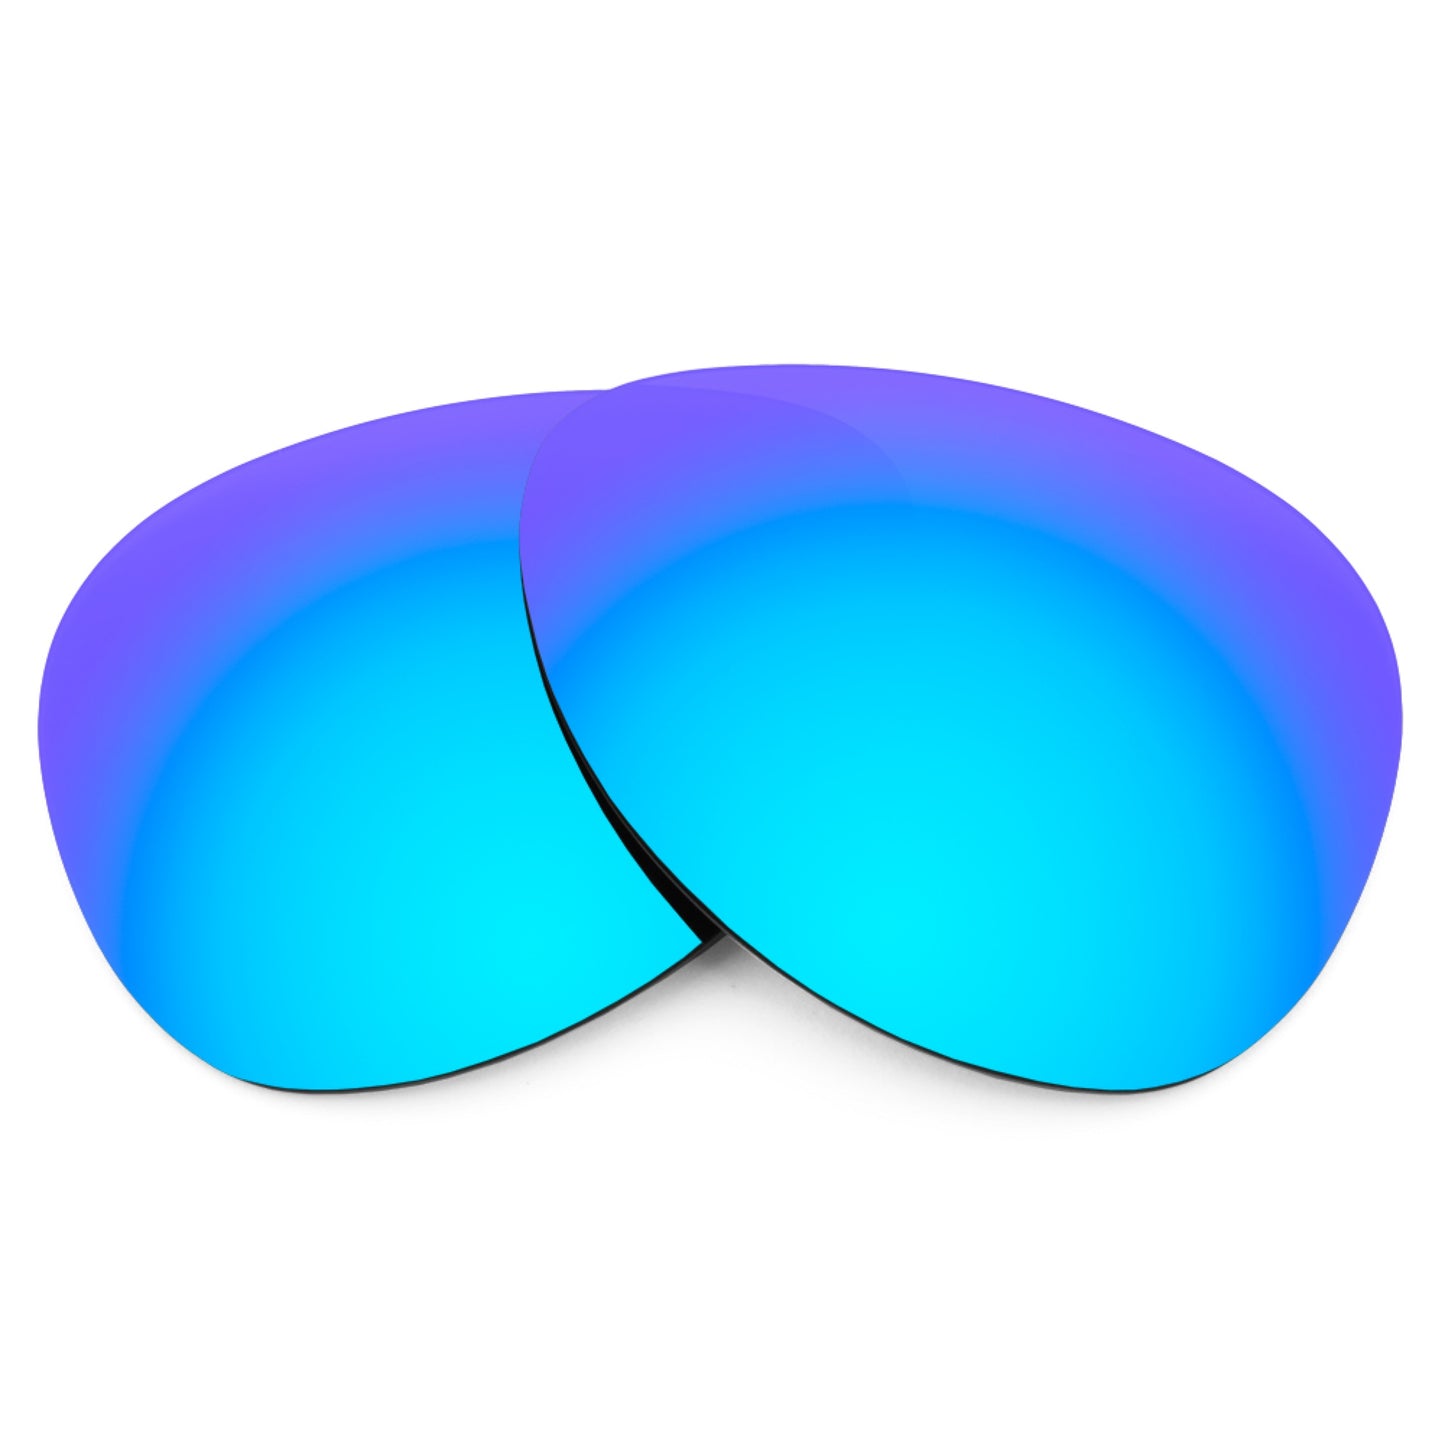 Revant replacement lenses for Ray-Ban Aviator RB3025 62mm Non-Polarized Ice Blue